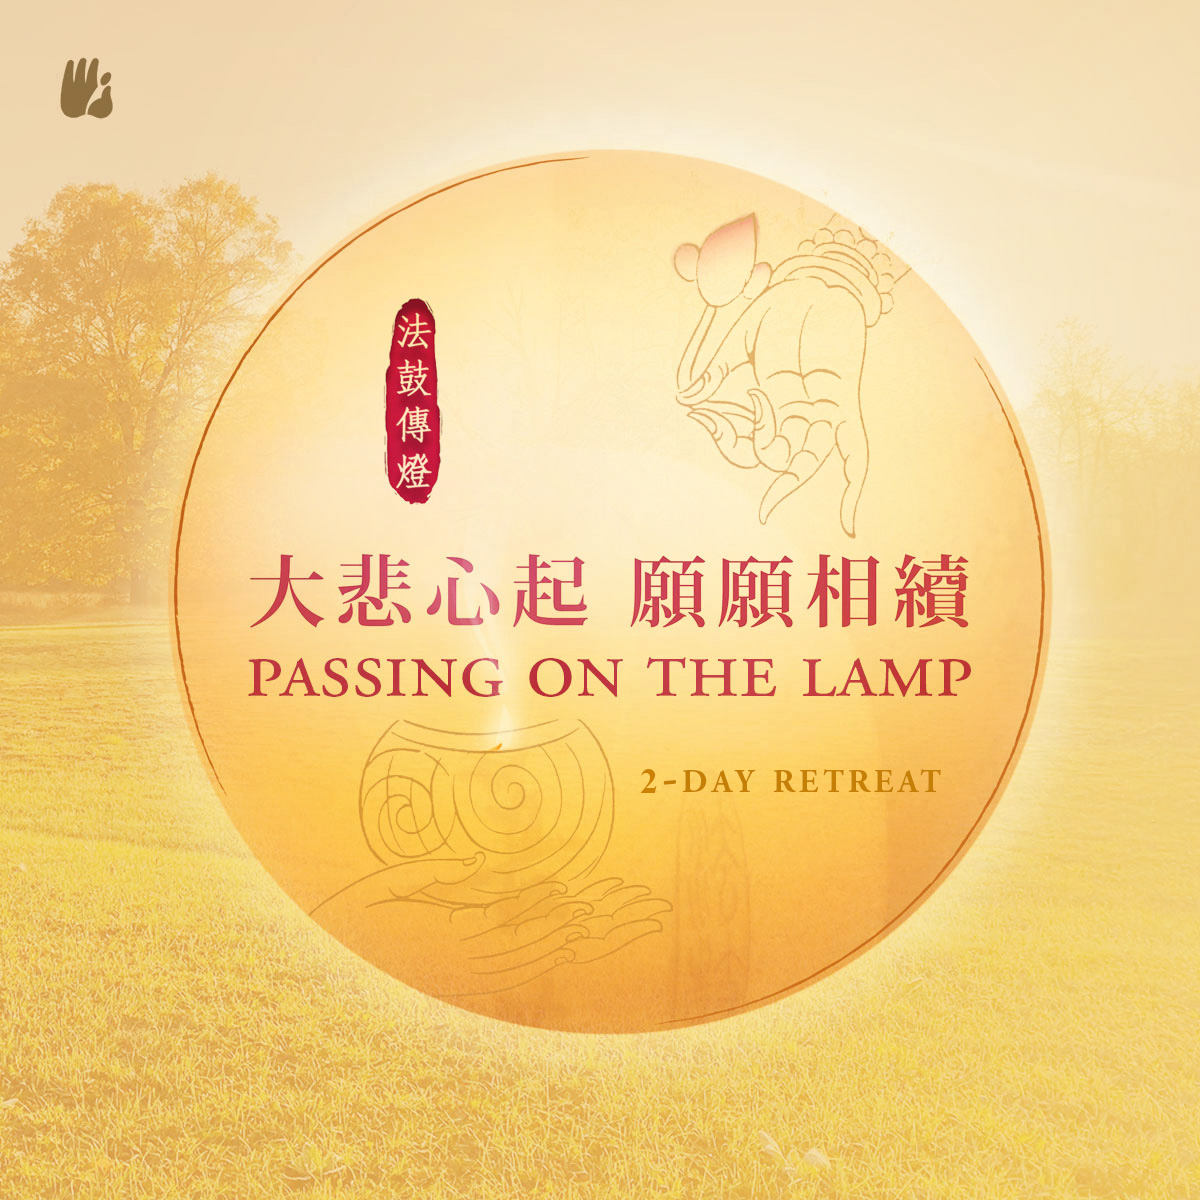 Passing on the Lamp 2-day Retreat